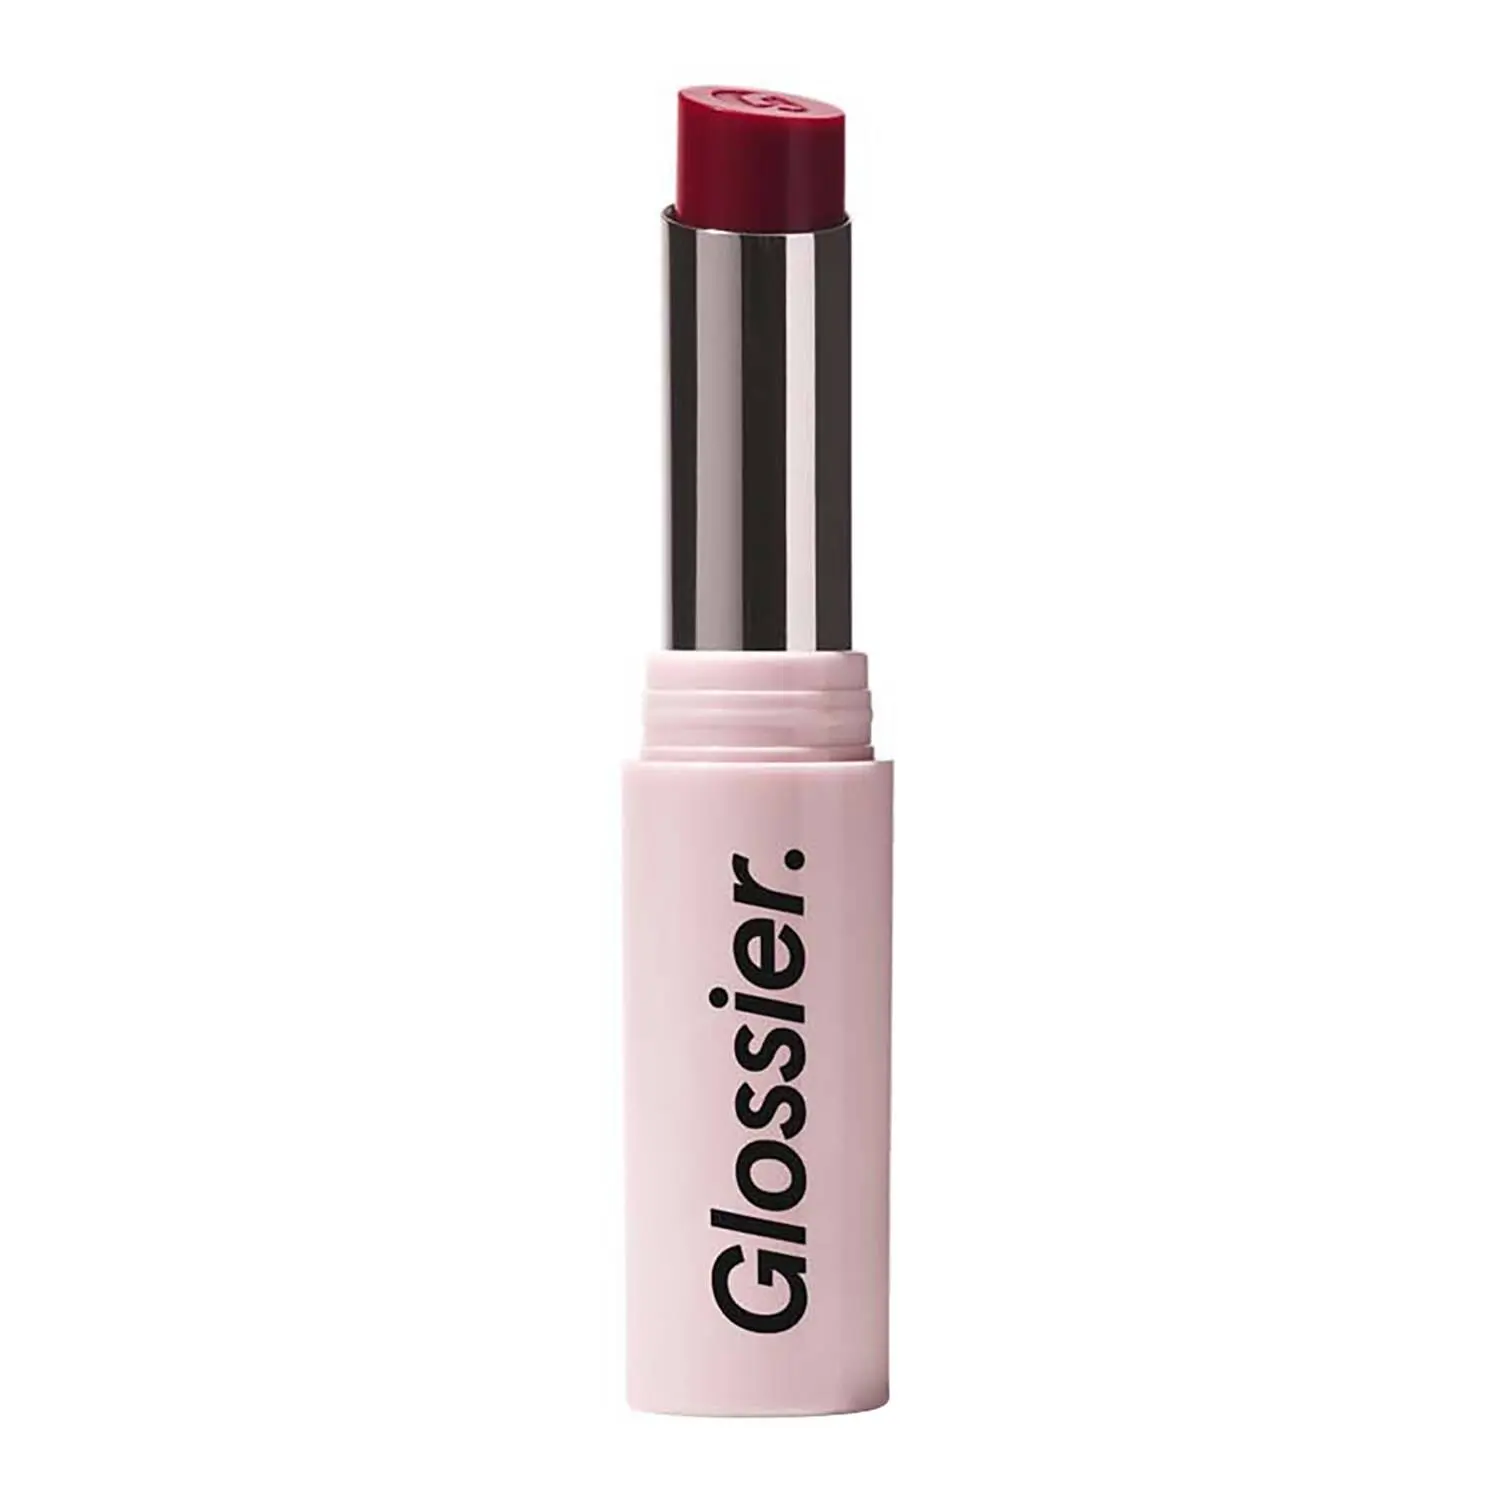 Glossier Ultralip High Shine Lipstick with Hyaluronic Acid Discounts and Cashback